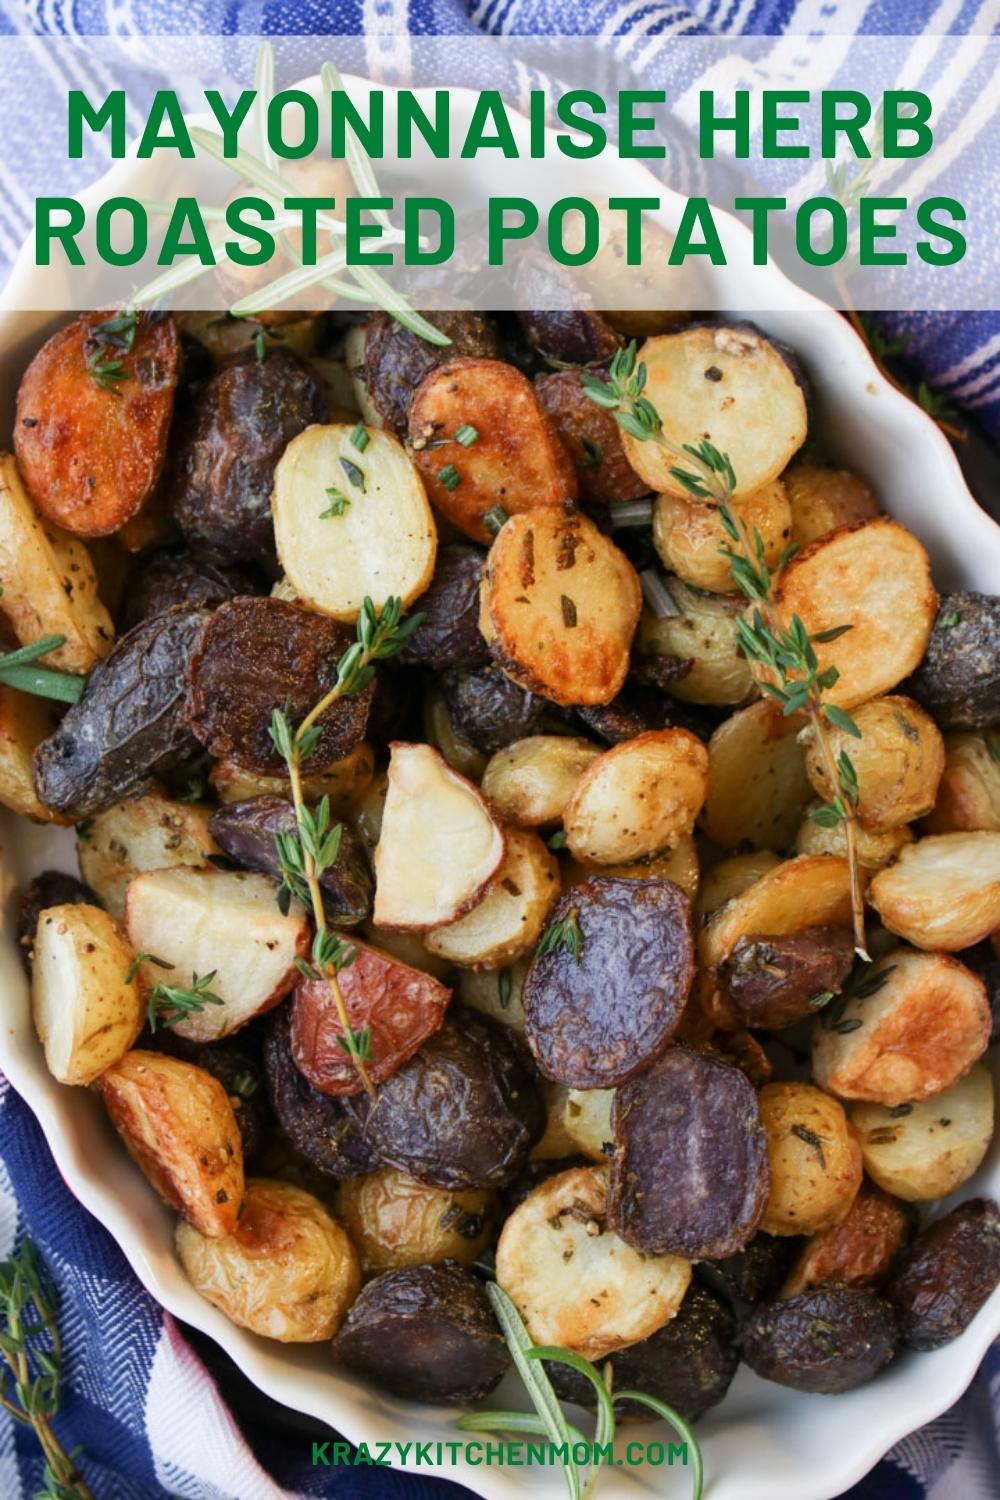 These mayonnaise herb roasted potatoes are my all-time new favorite way to make family-style crispy potatoes with a creamy inside.  via @krazykitchenmom